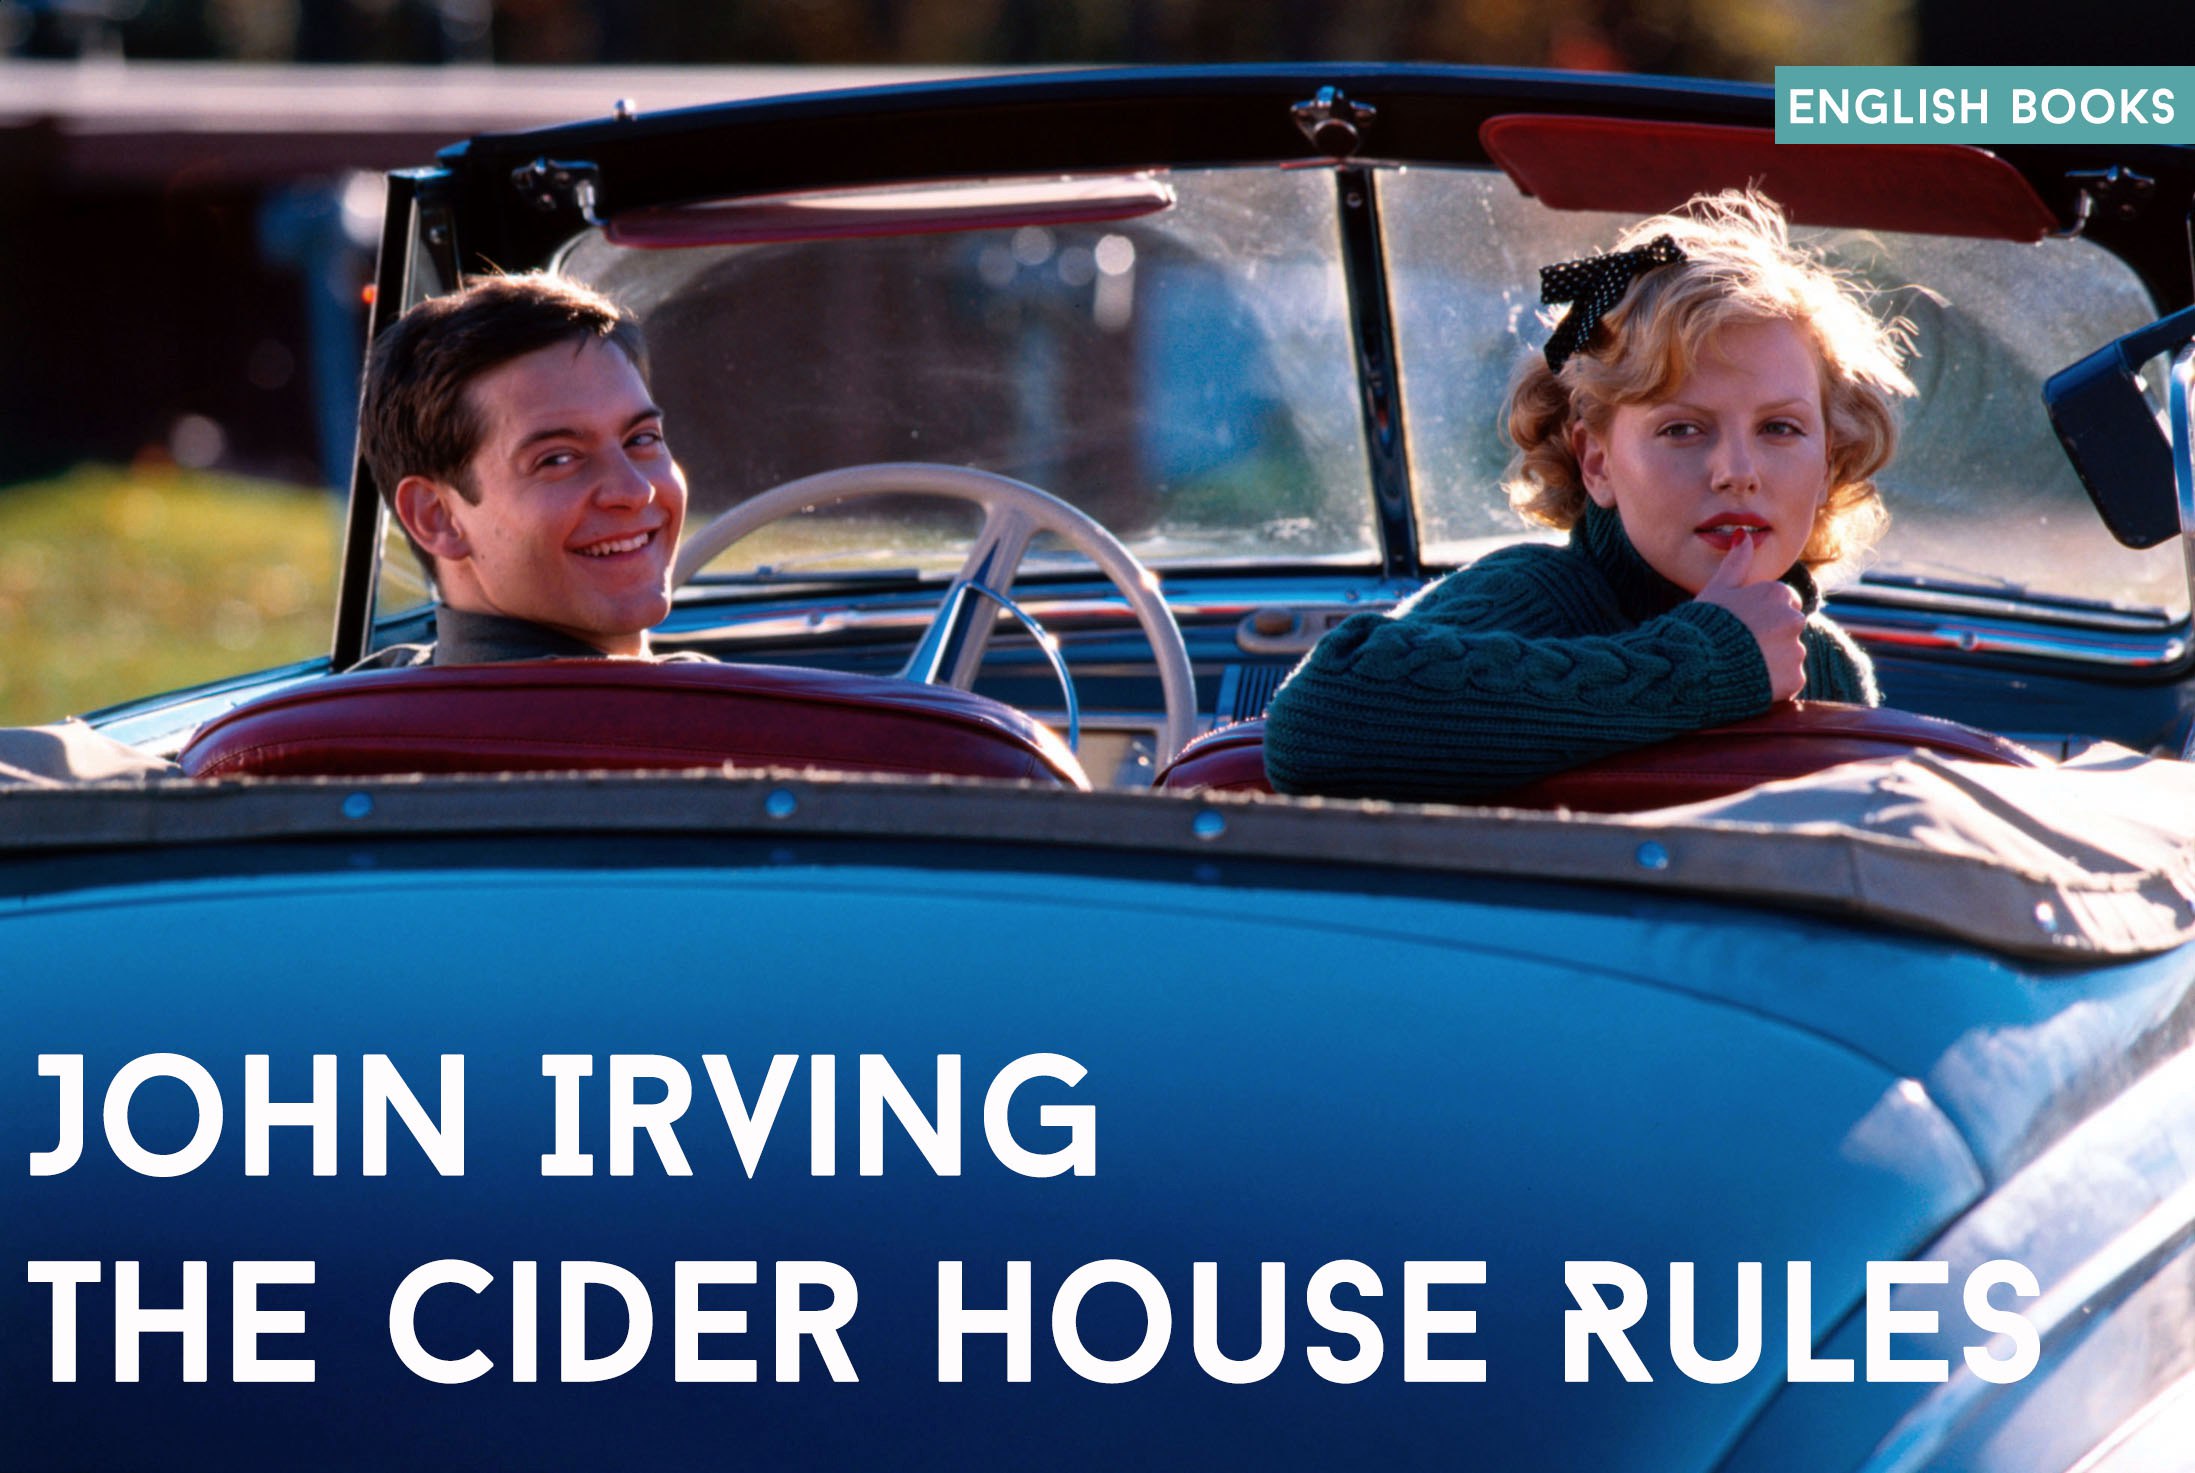 John Irving — The Cider House Rules